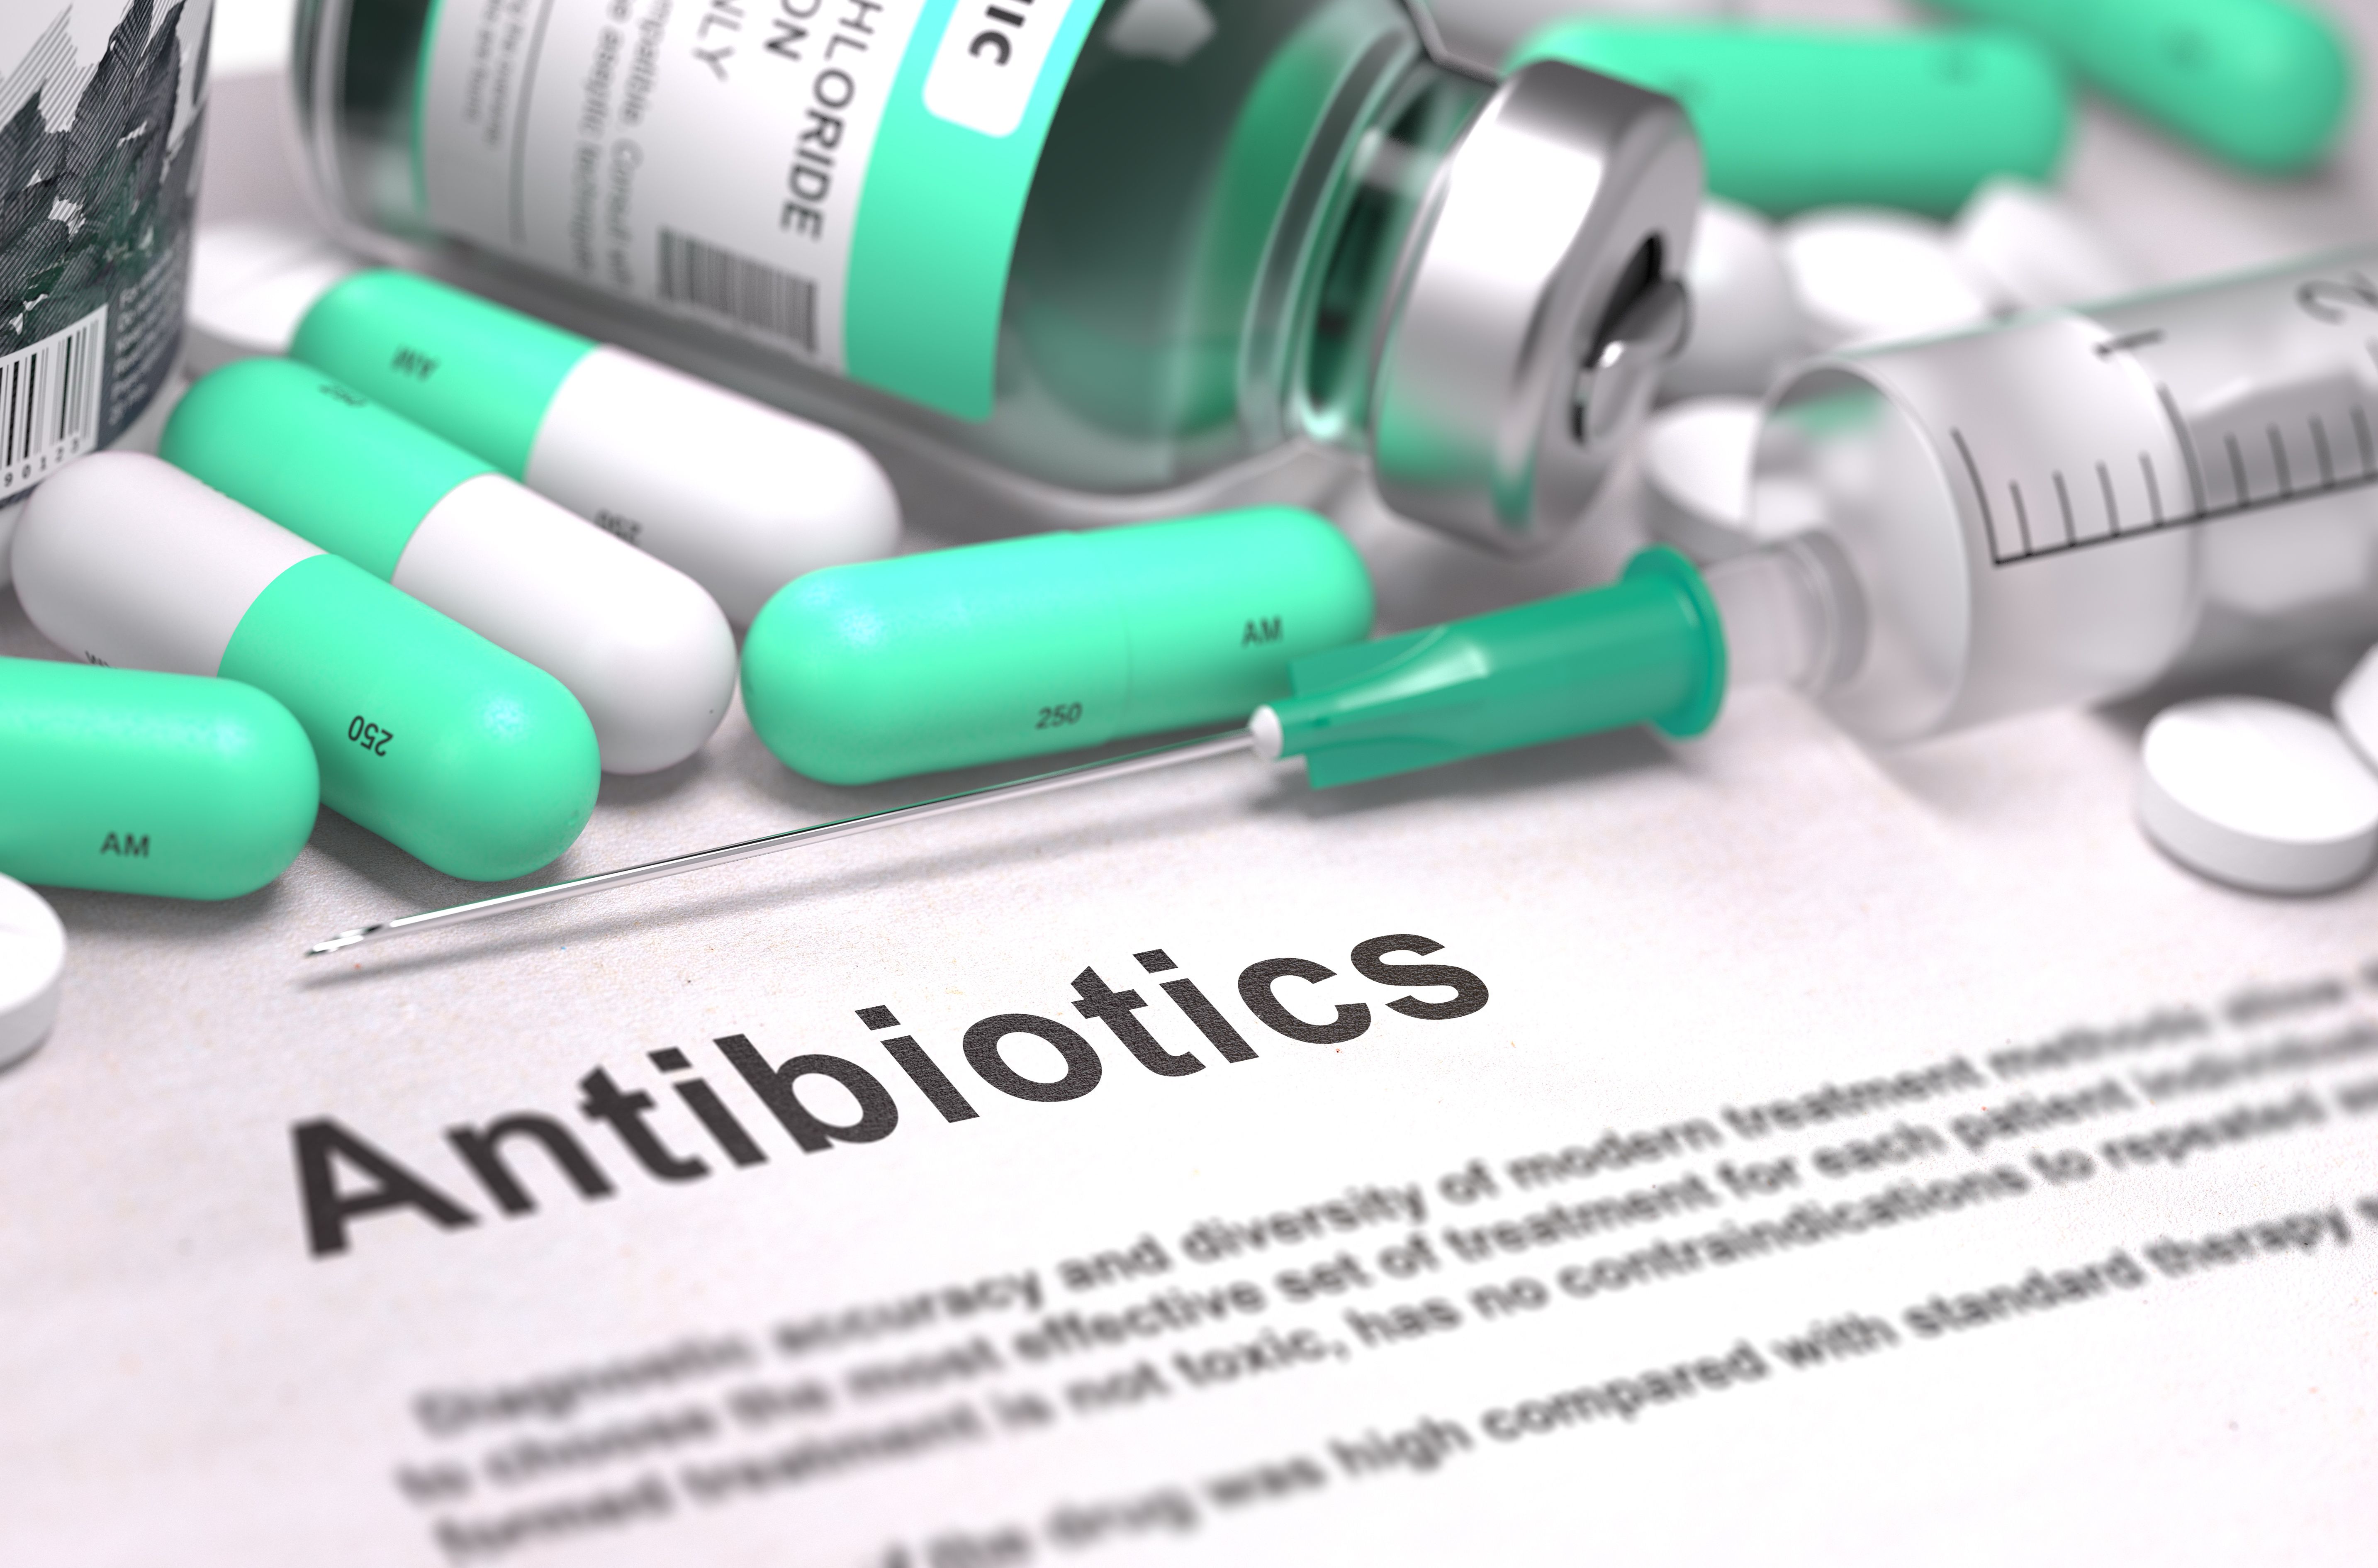 Pharmacists Play Crucial Role In Antimicrobial Stewardship